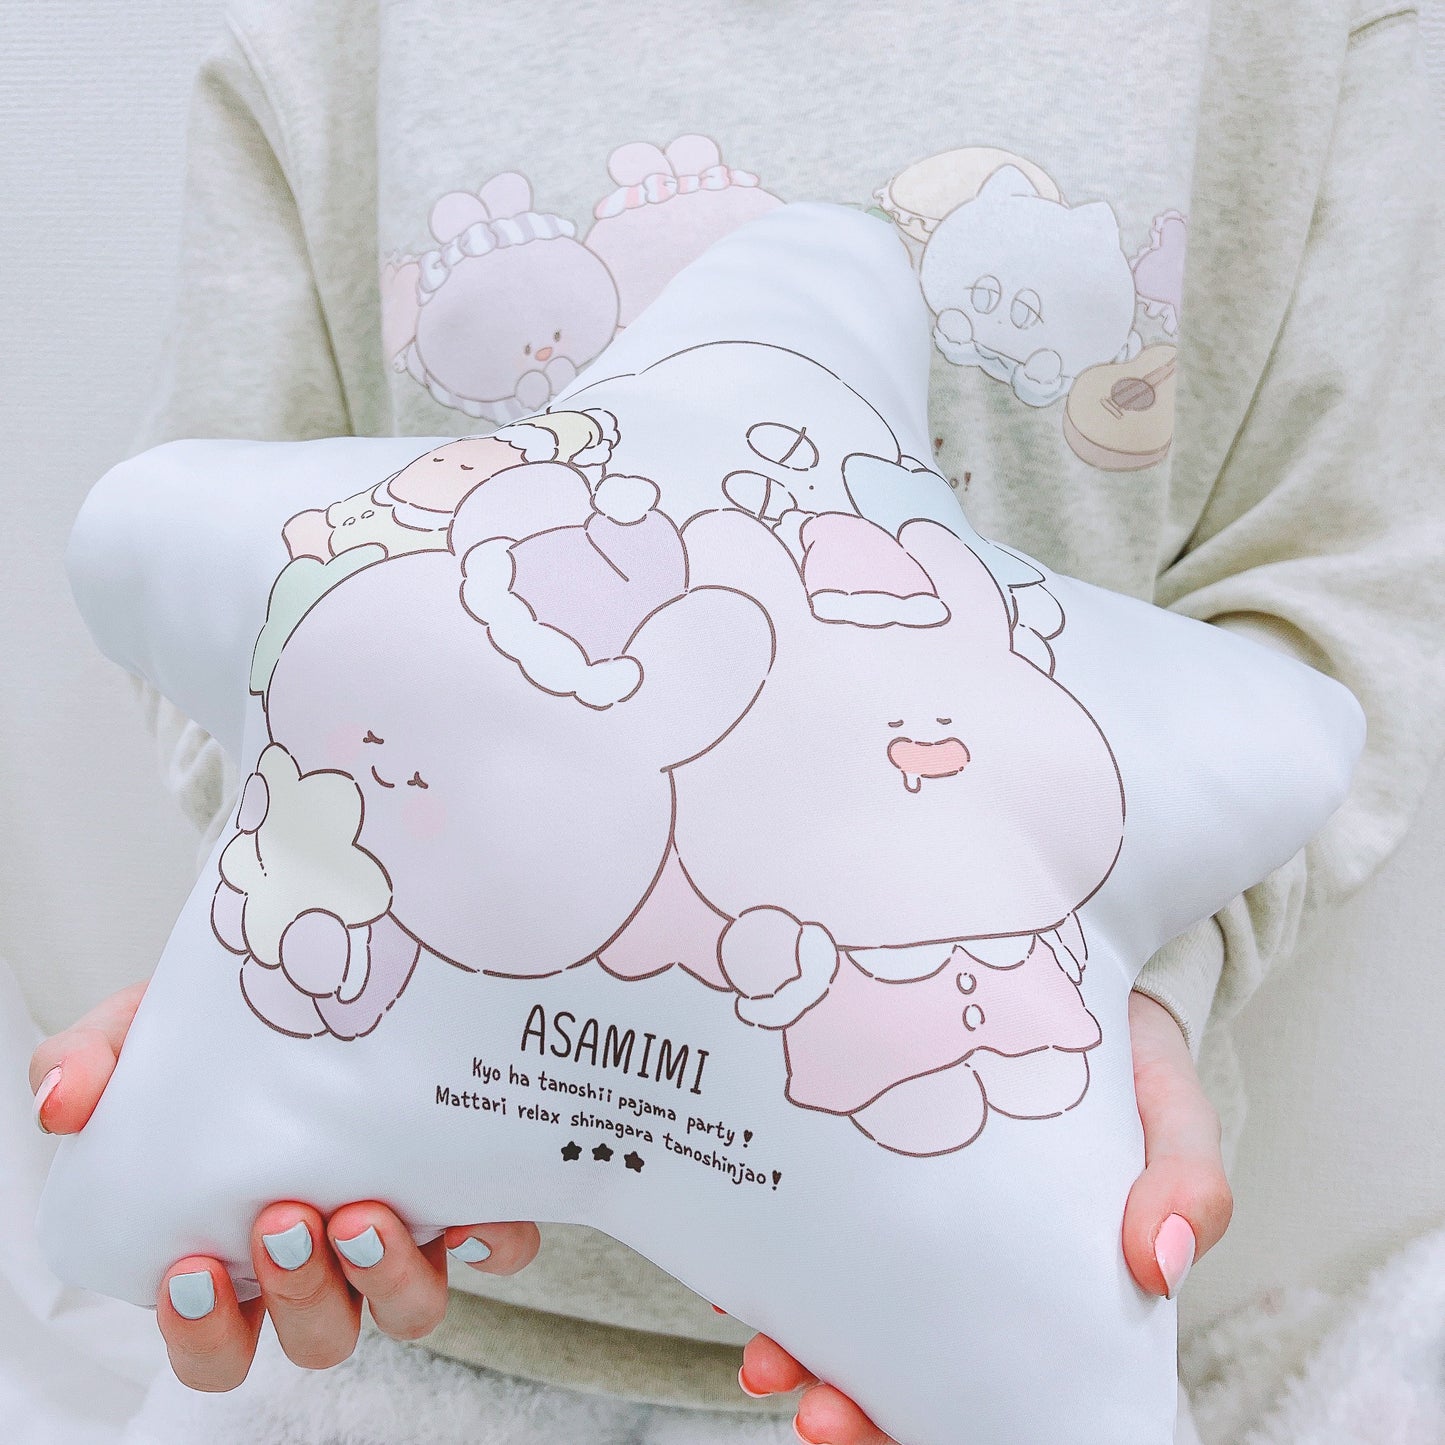 [Asamimi-chan] Die-cut cushion (pajama party) [shipped in early October]